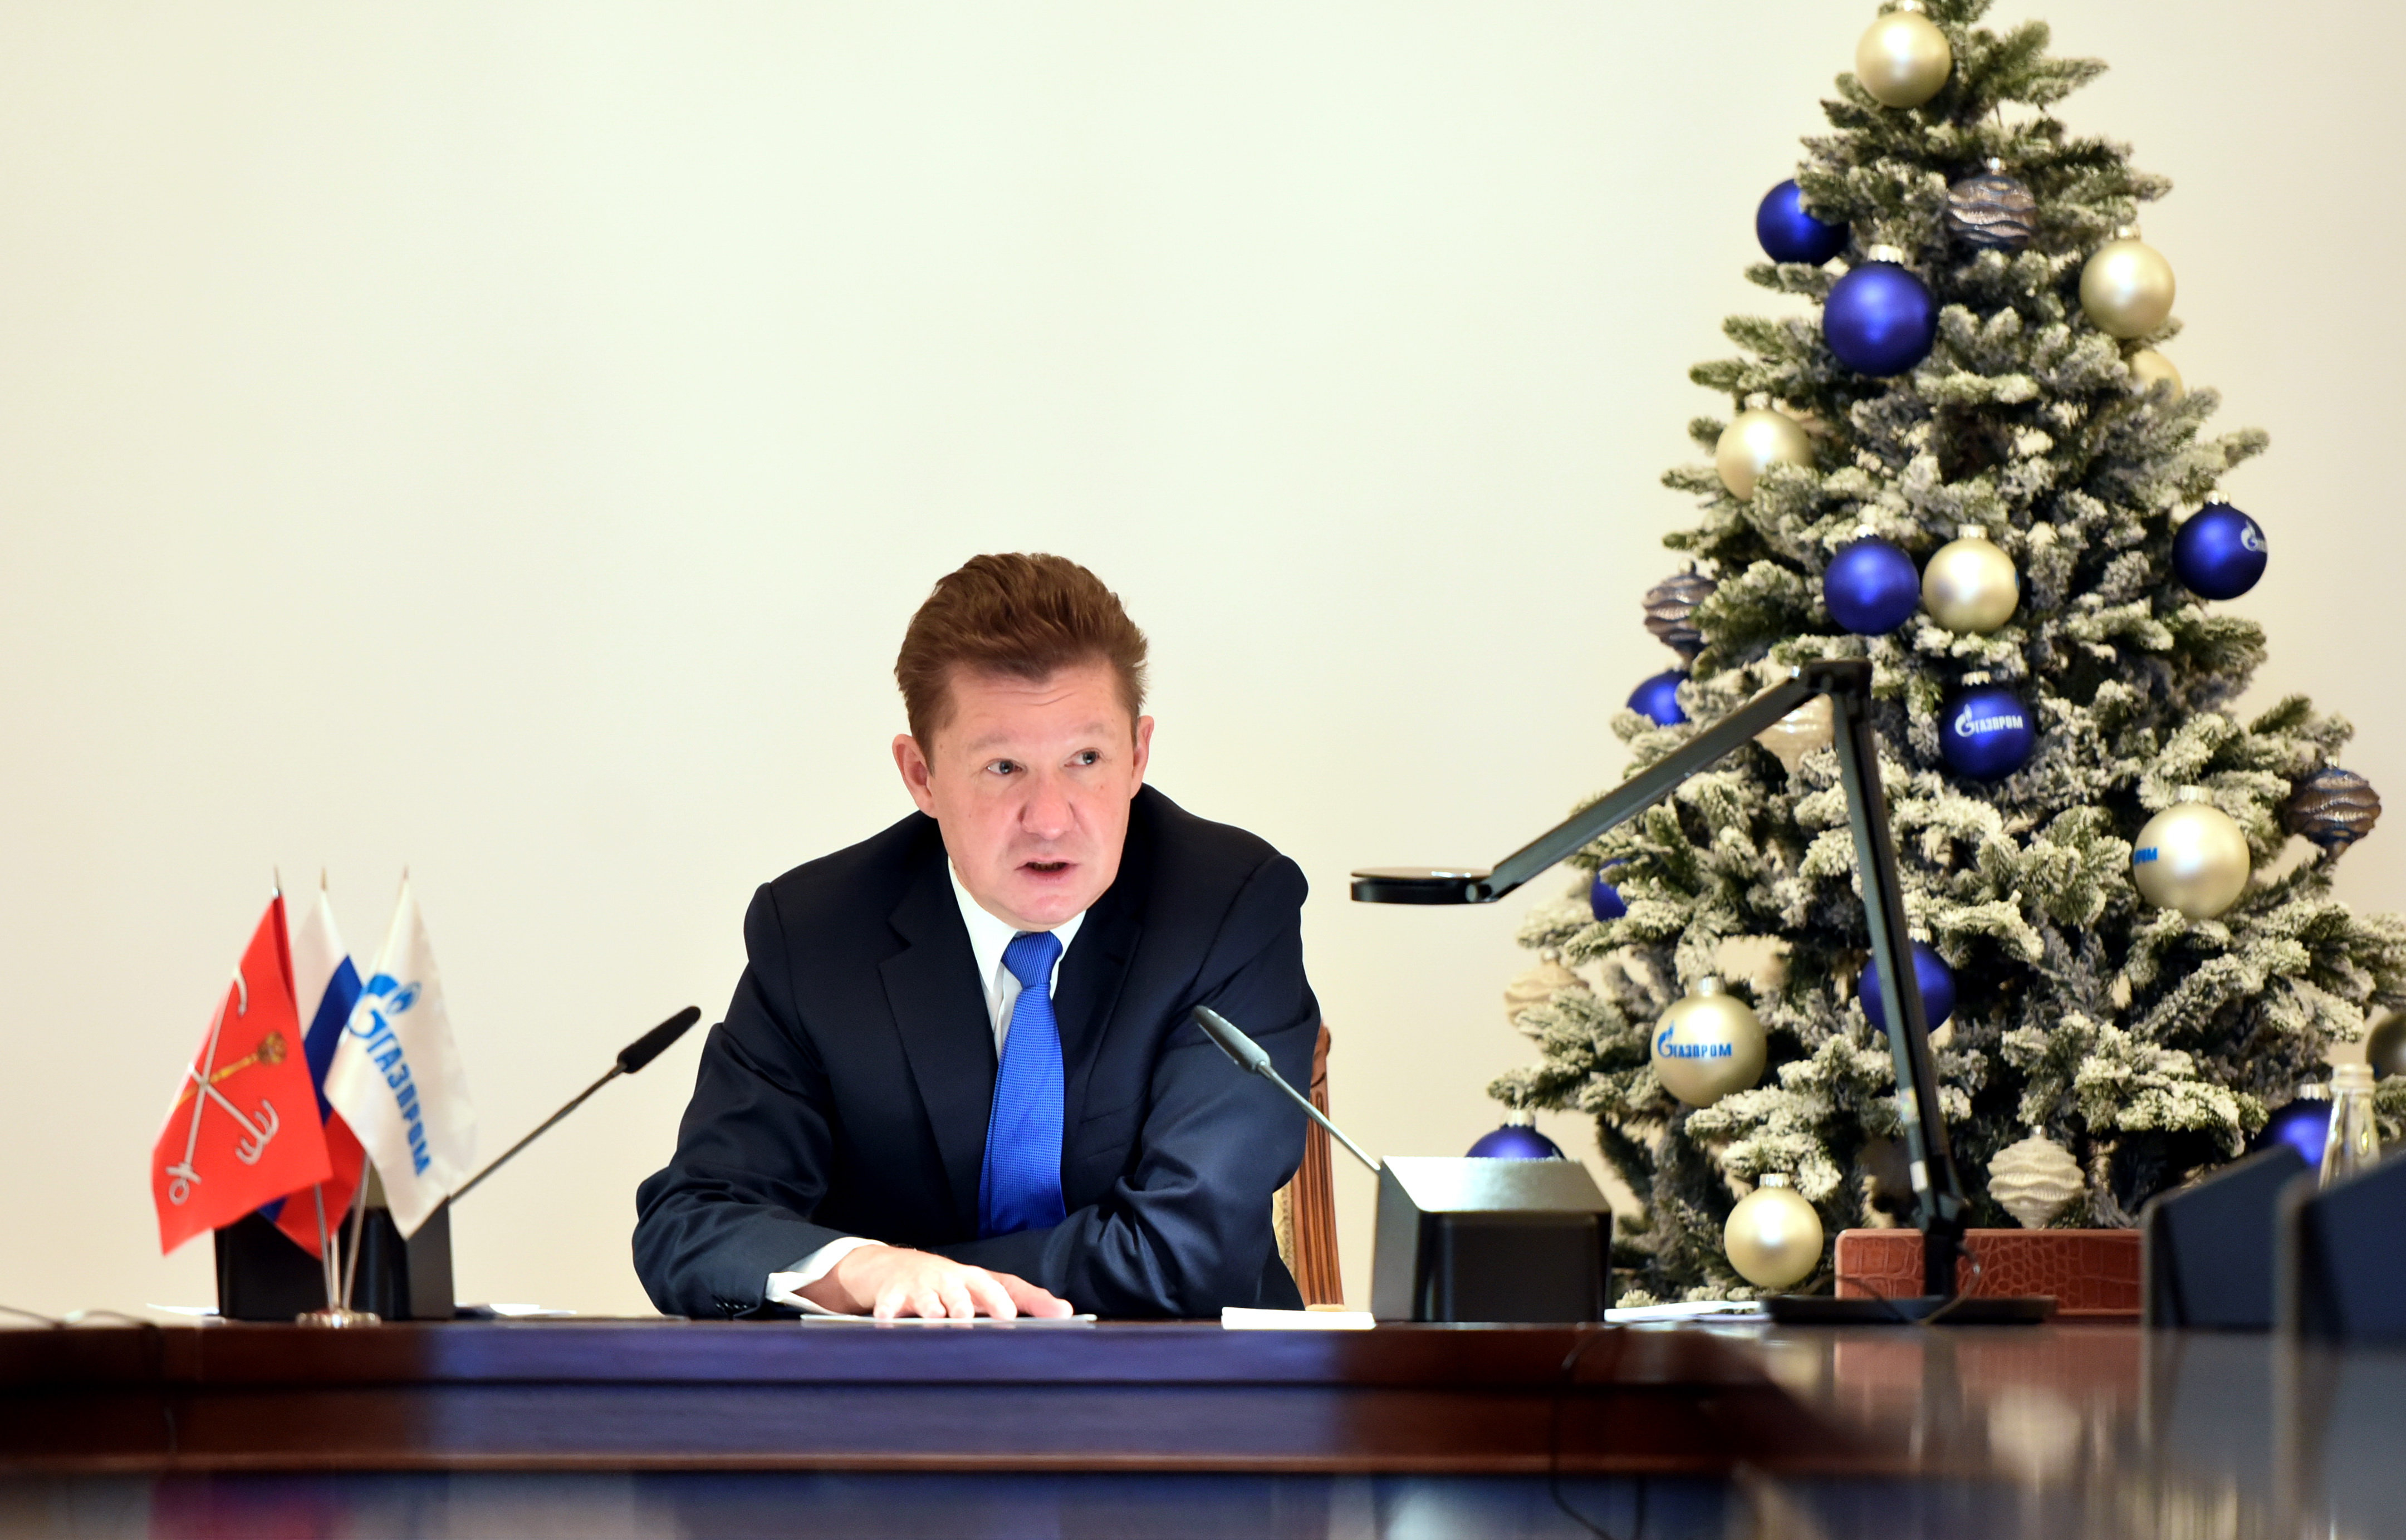 Speech by Alexey Miller at conference call on occasion of New Year’s Eve